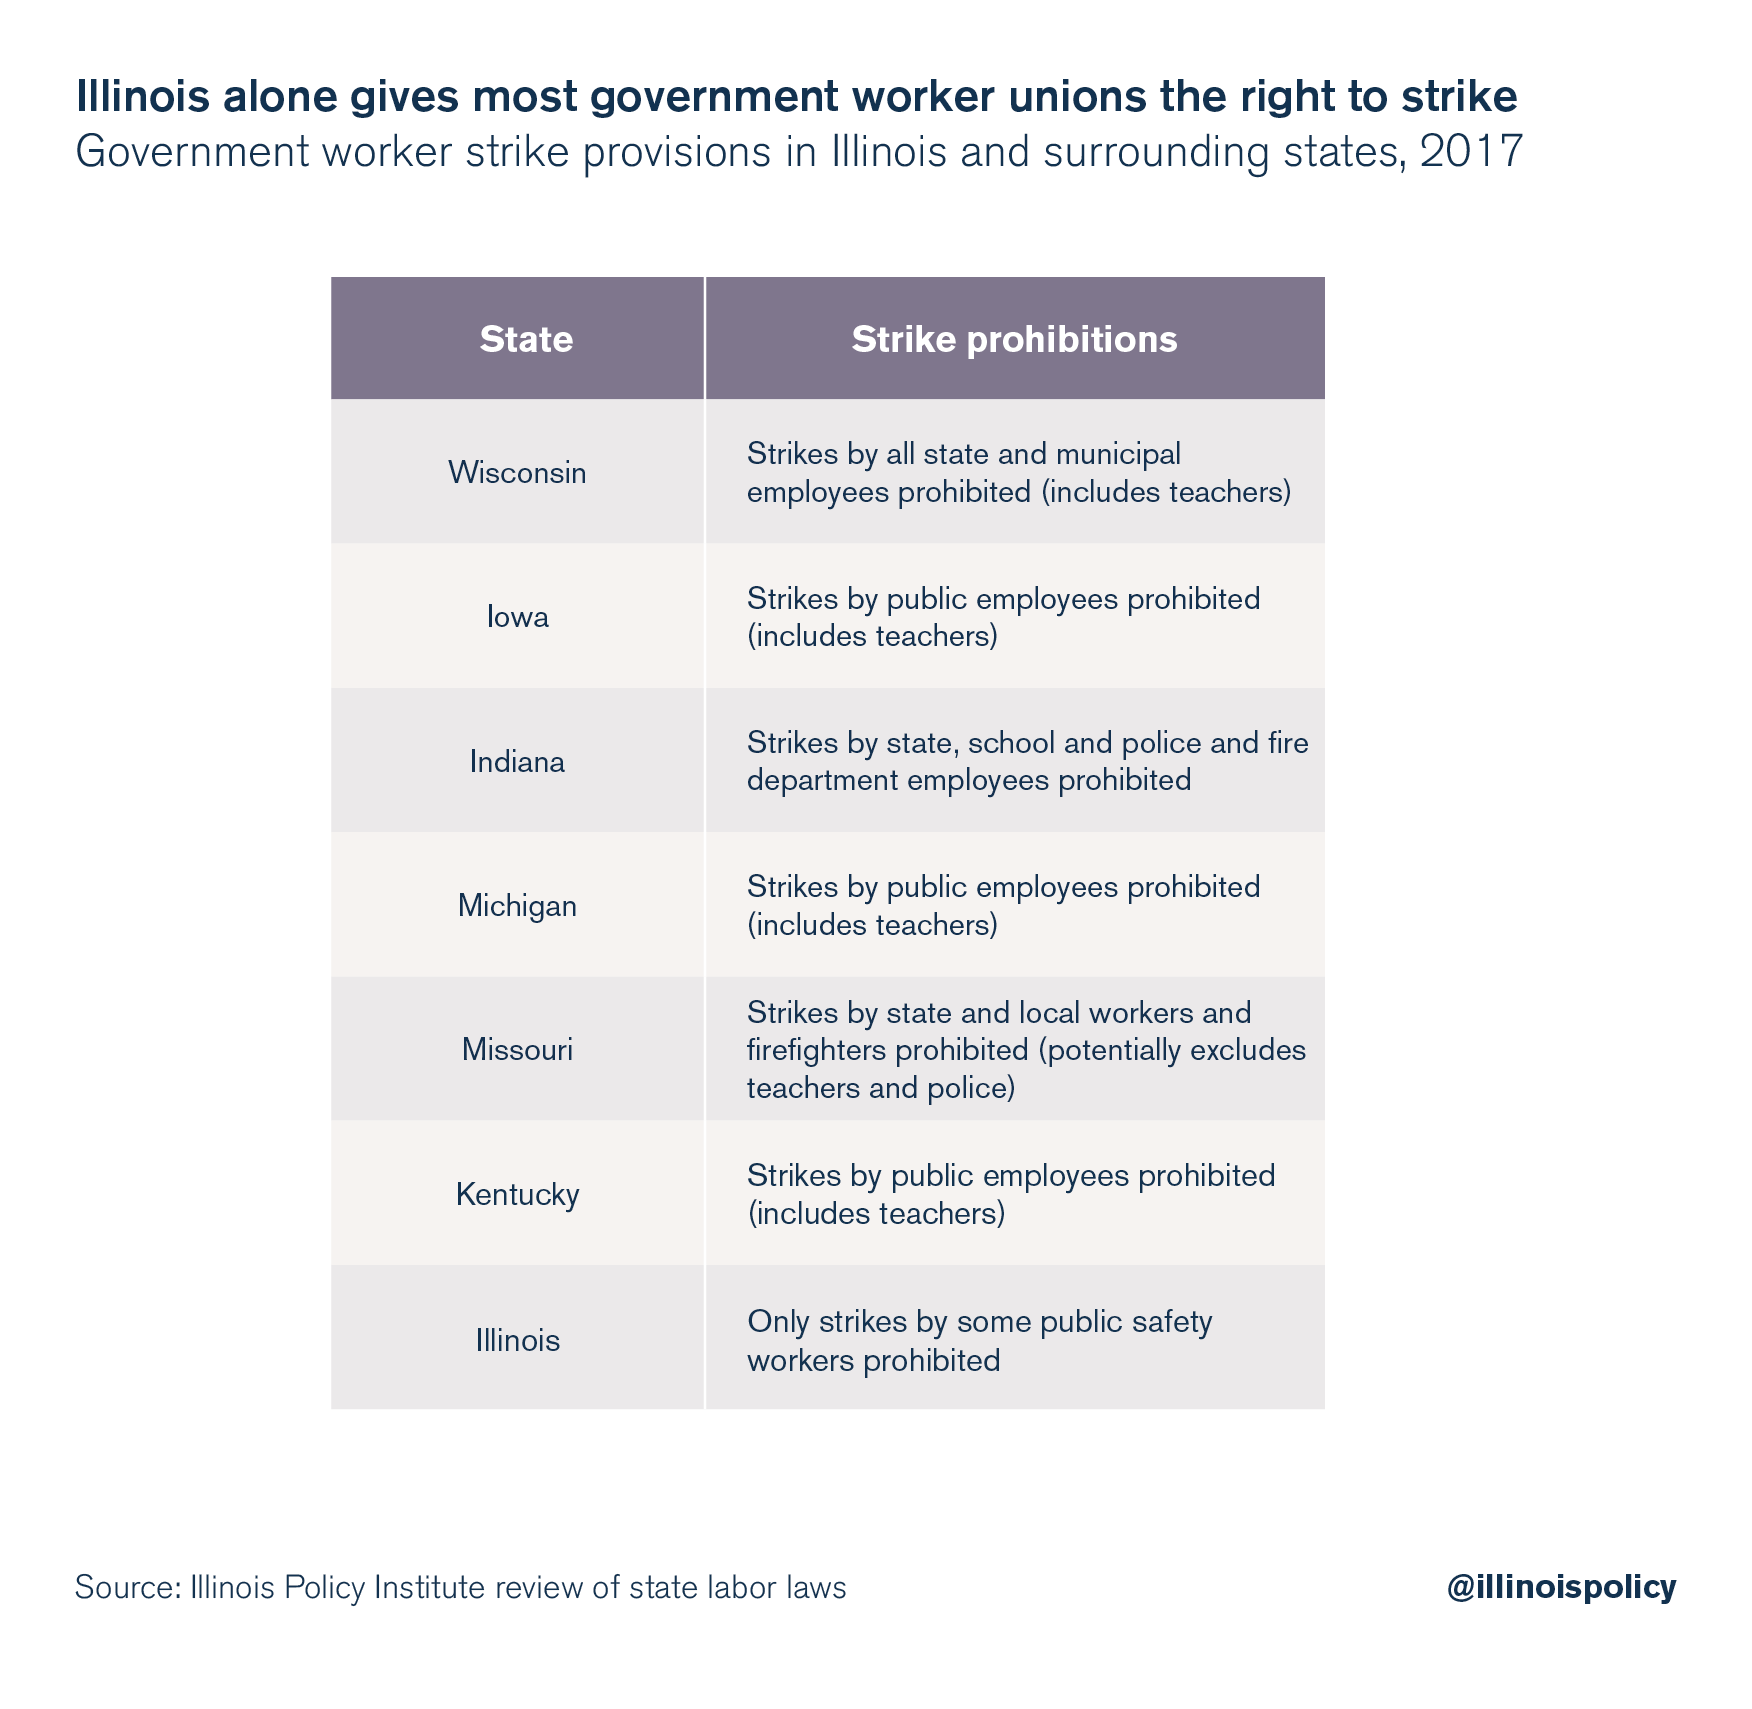 Illinois alone gives most government worker unions the right to strike